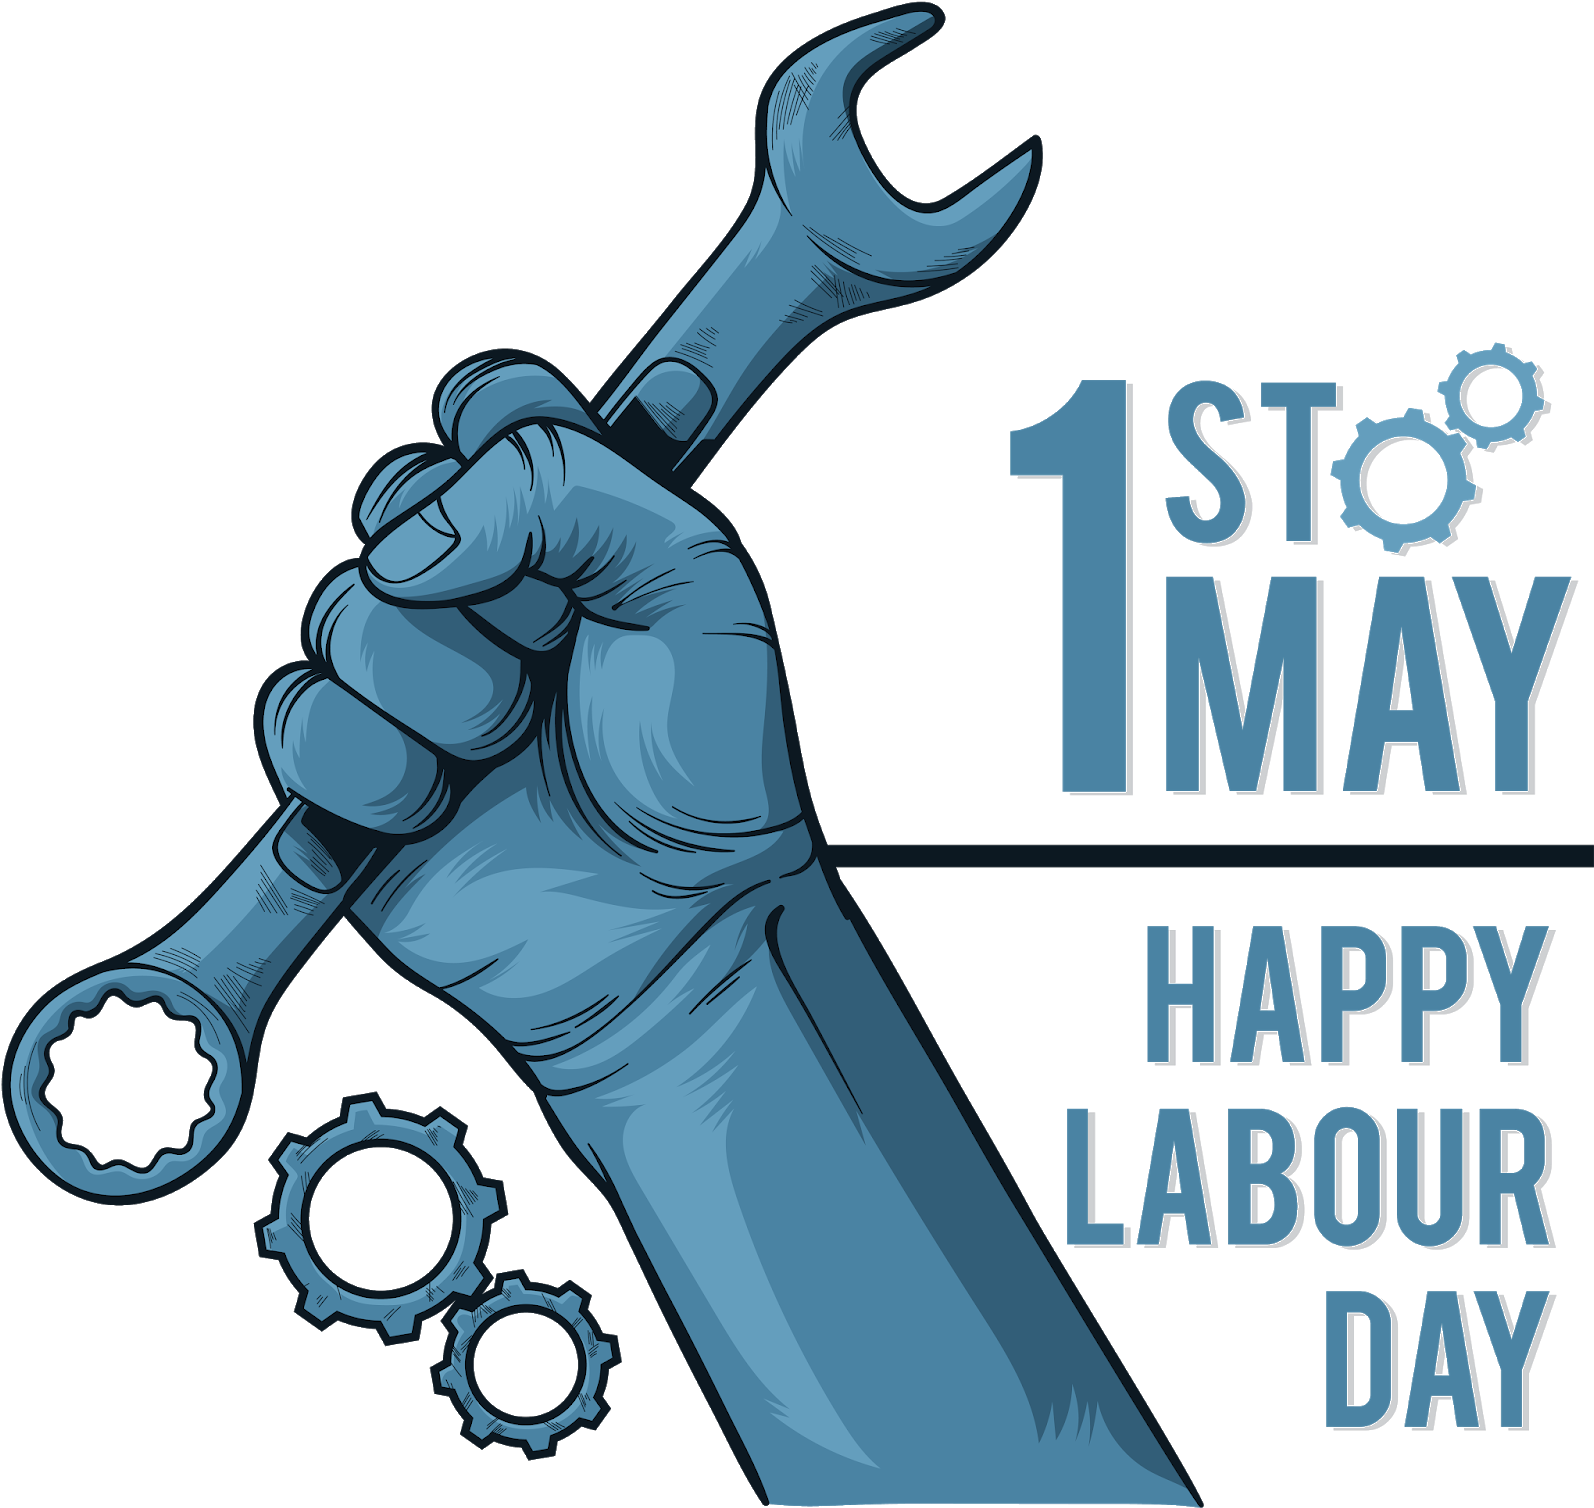 Download 1st May Happy Labor Day International Workers' Day PNG Image